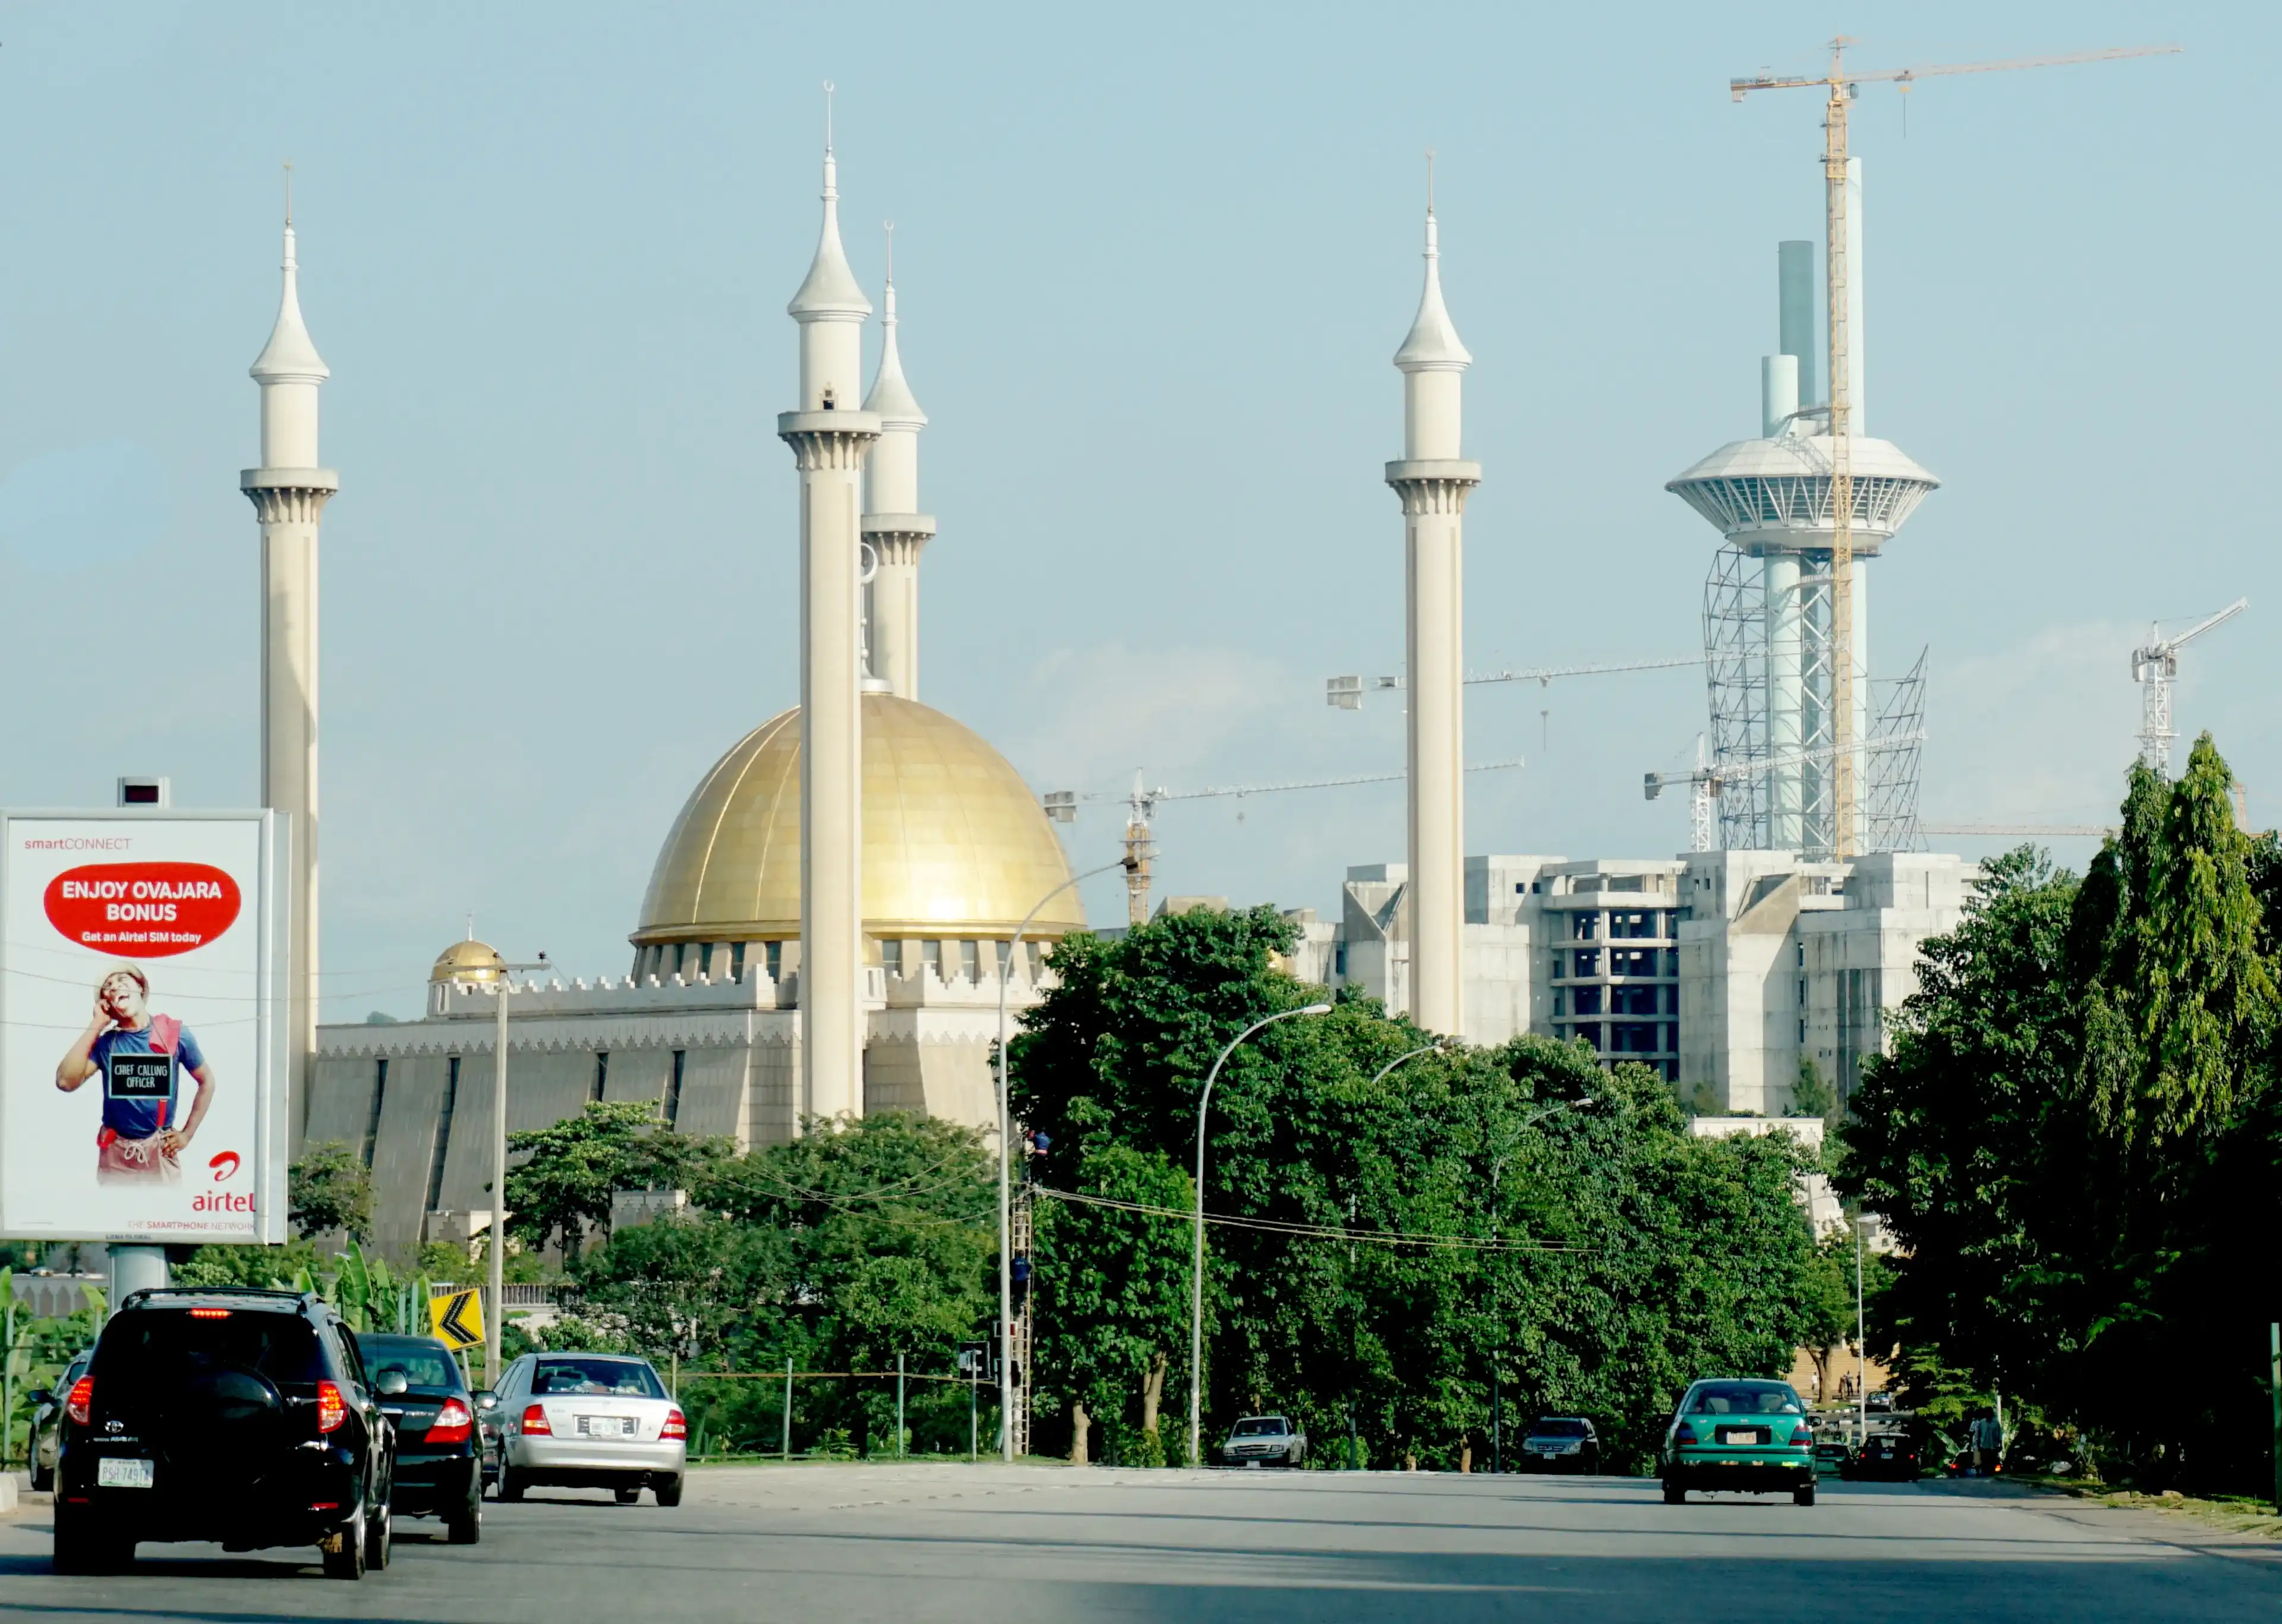 Abuja, FCT/Nigeria - May 13th, 2018: Picture focus on the Abuja National mosque in Abuja, Nigeria. It has 4 minarets and muslims pray 5 times a day. Islam is one of the main religion in Nigeria.